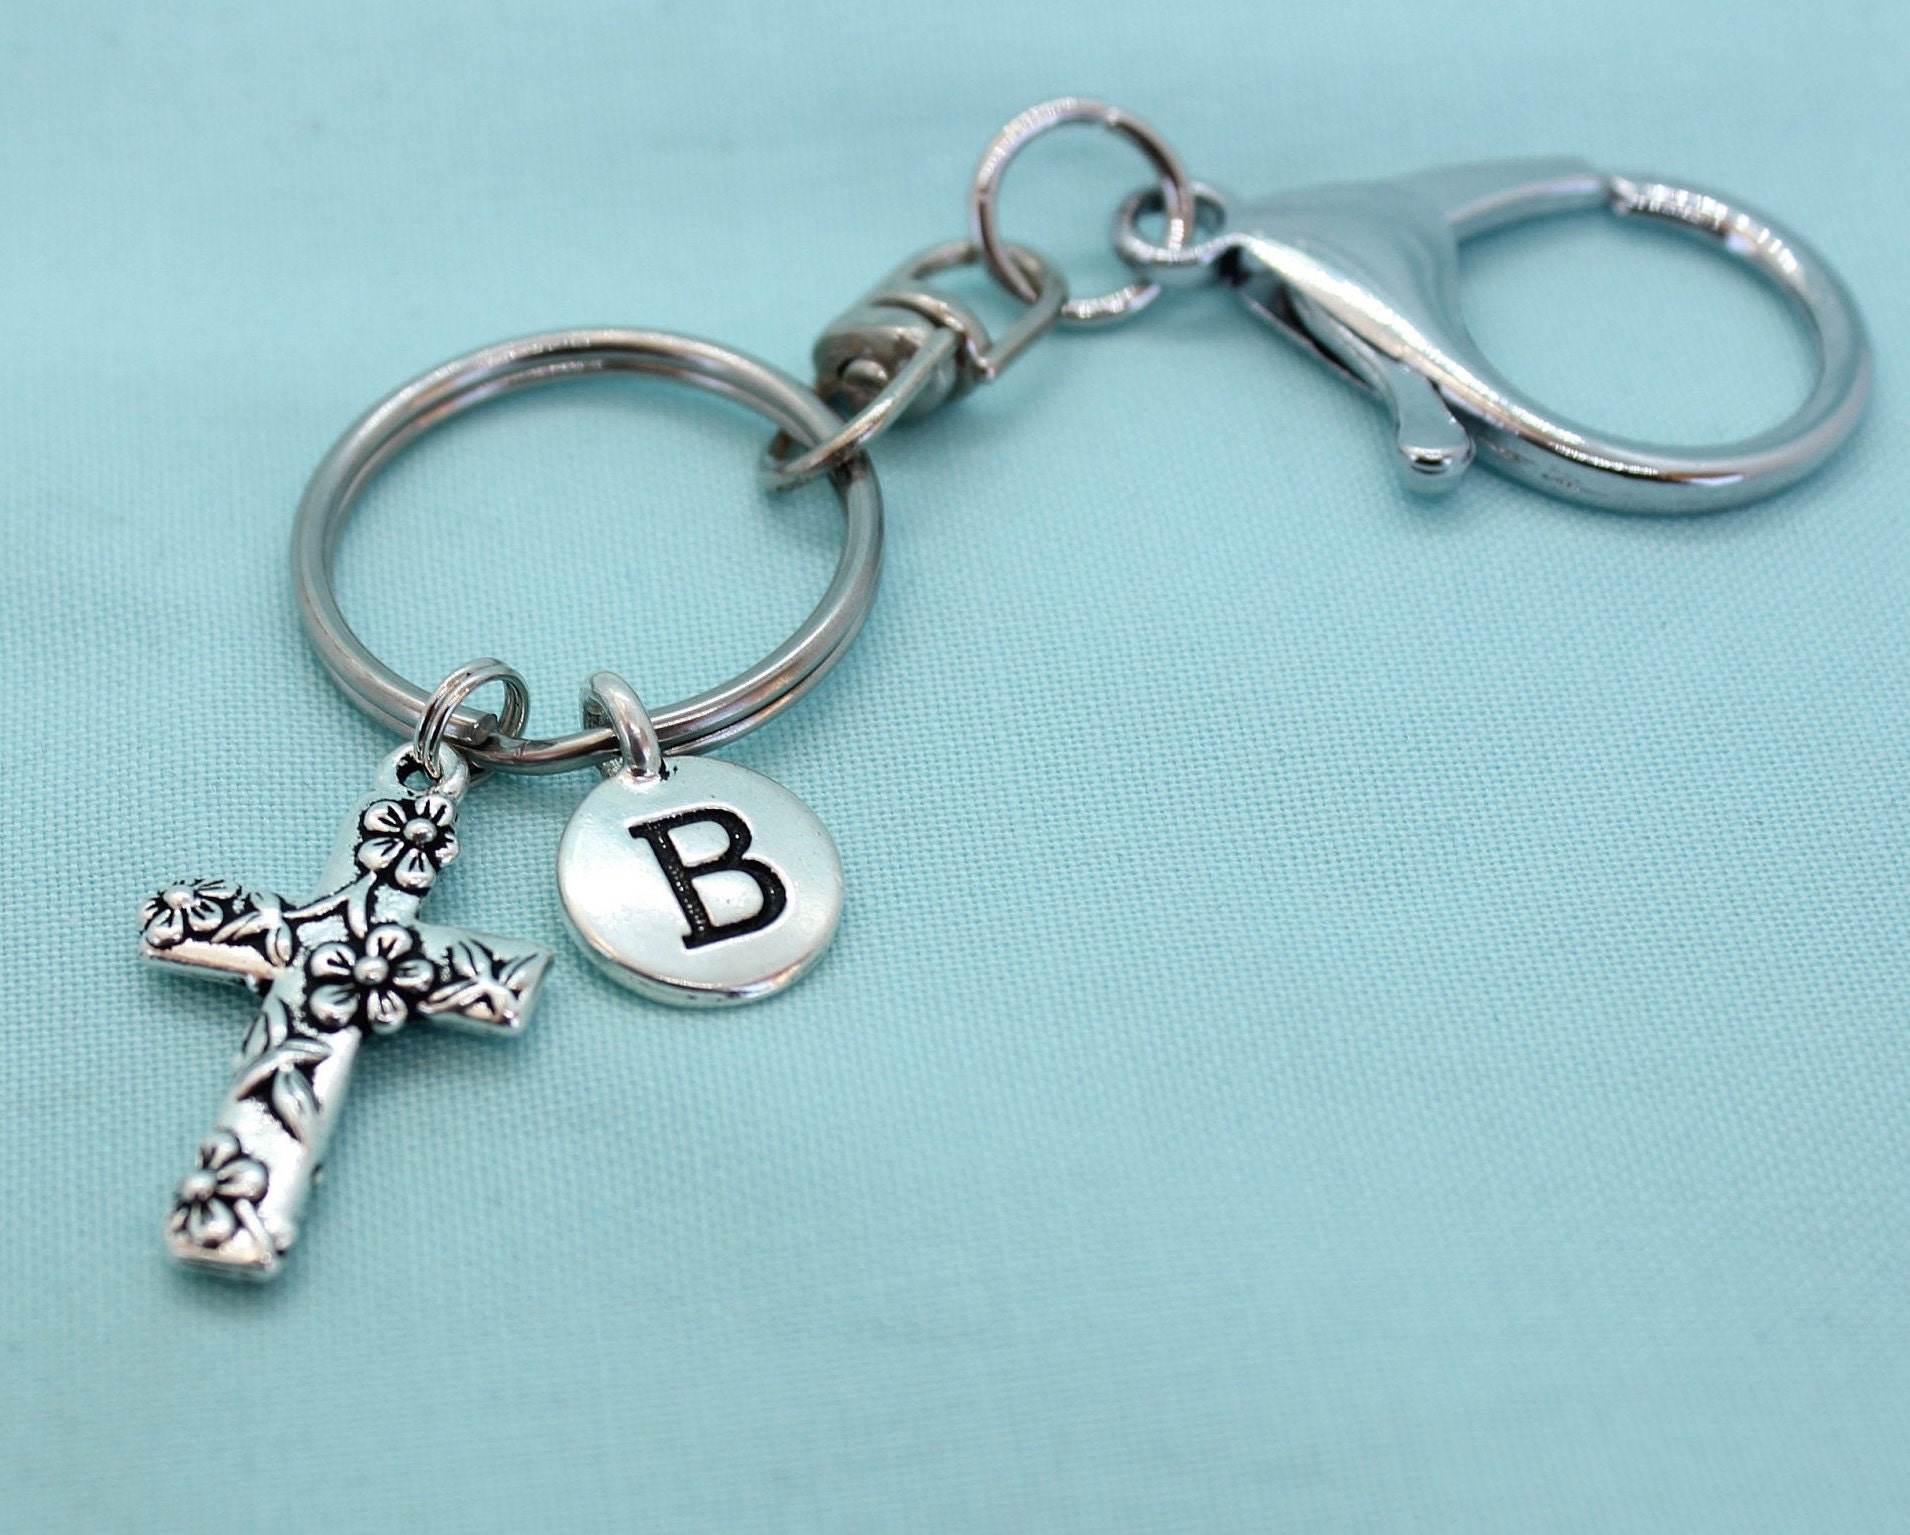 Retro Stainless Steel Cross Keychain Mens Christian Religious Knife Pendant  Spring Snap Buckle Car Keyring Vikings Norse Jewelry